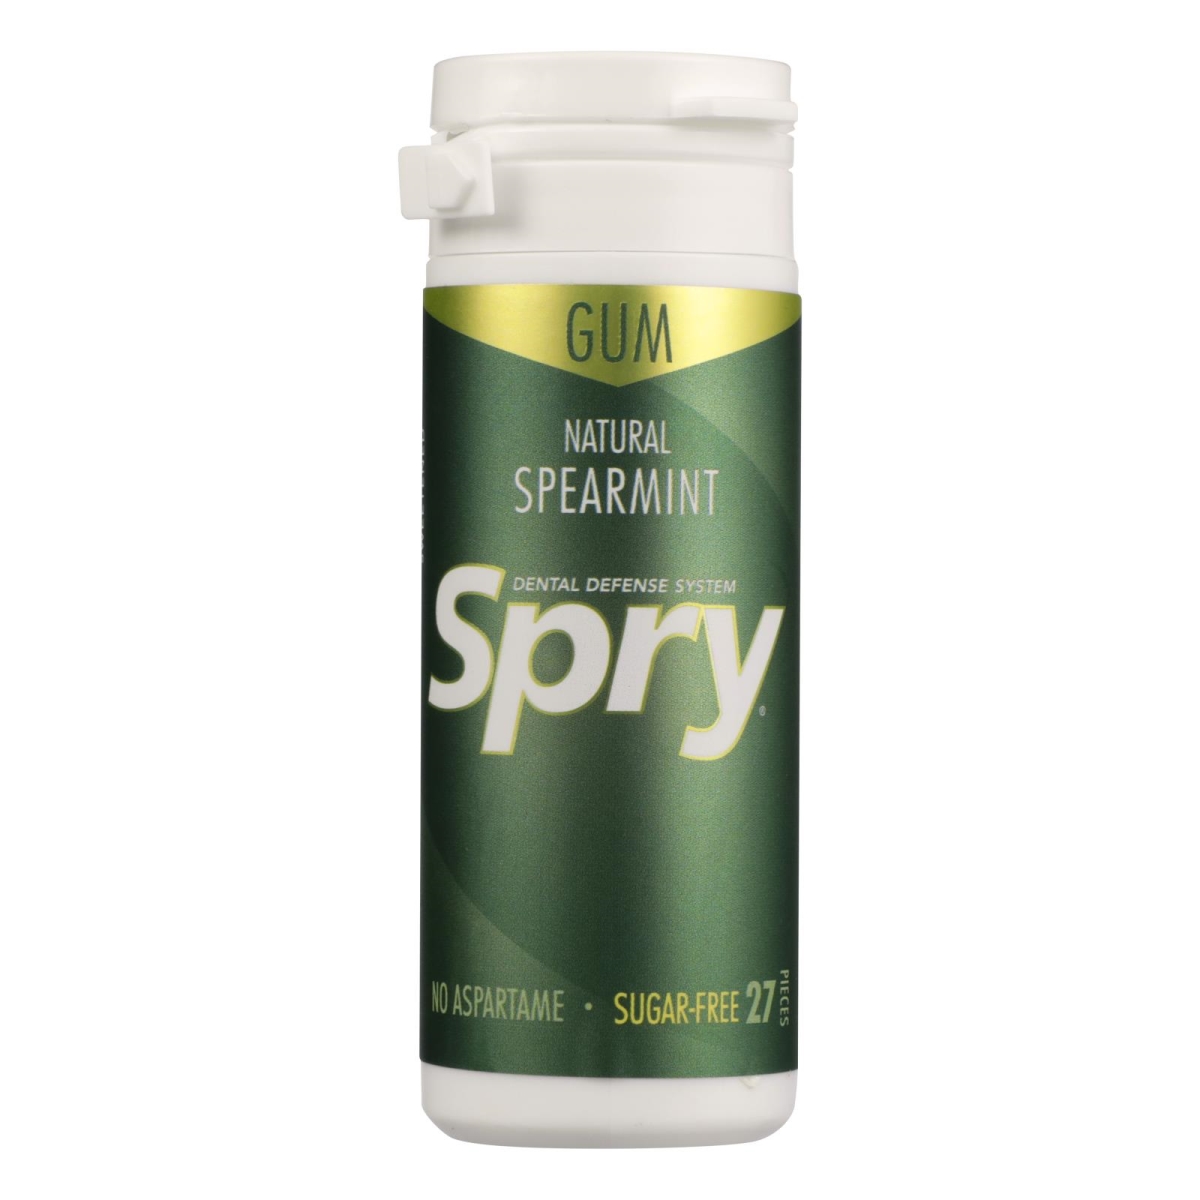 Picture of Spry HG2441541 All Natural Spearmint Chewing Gum for Dental - Case of 6 - 27 Count